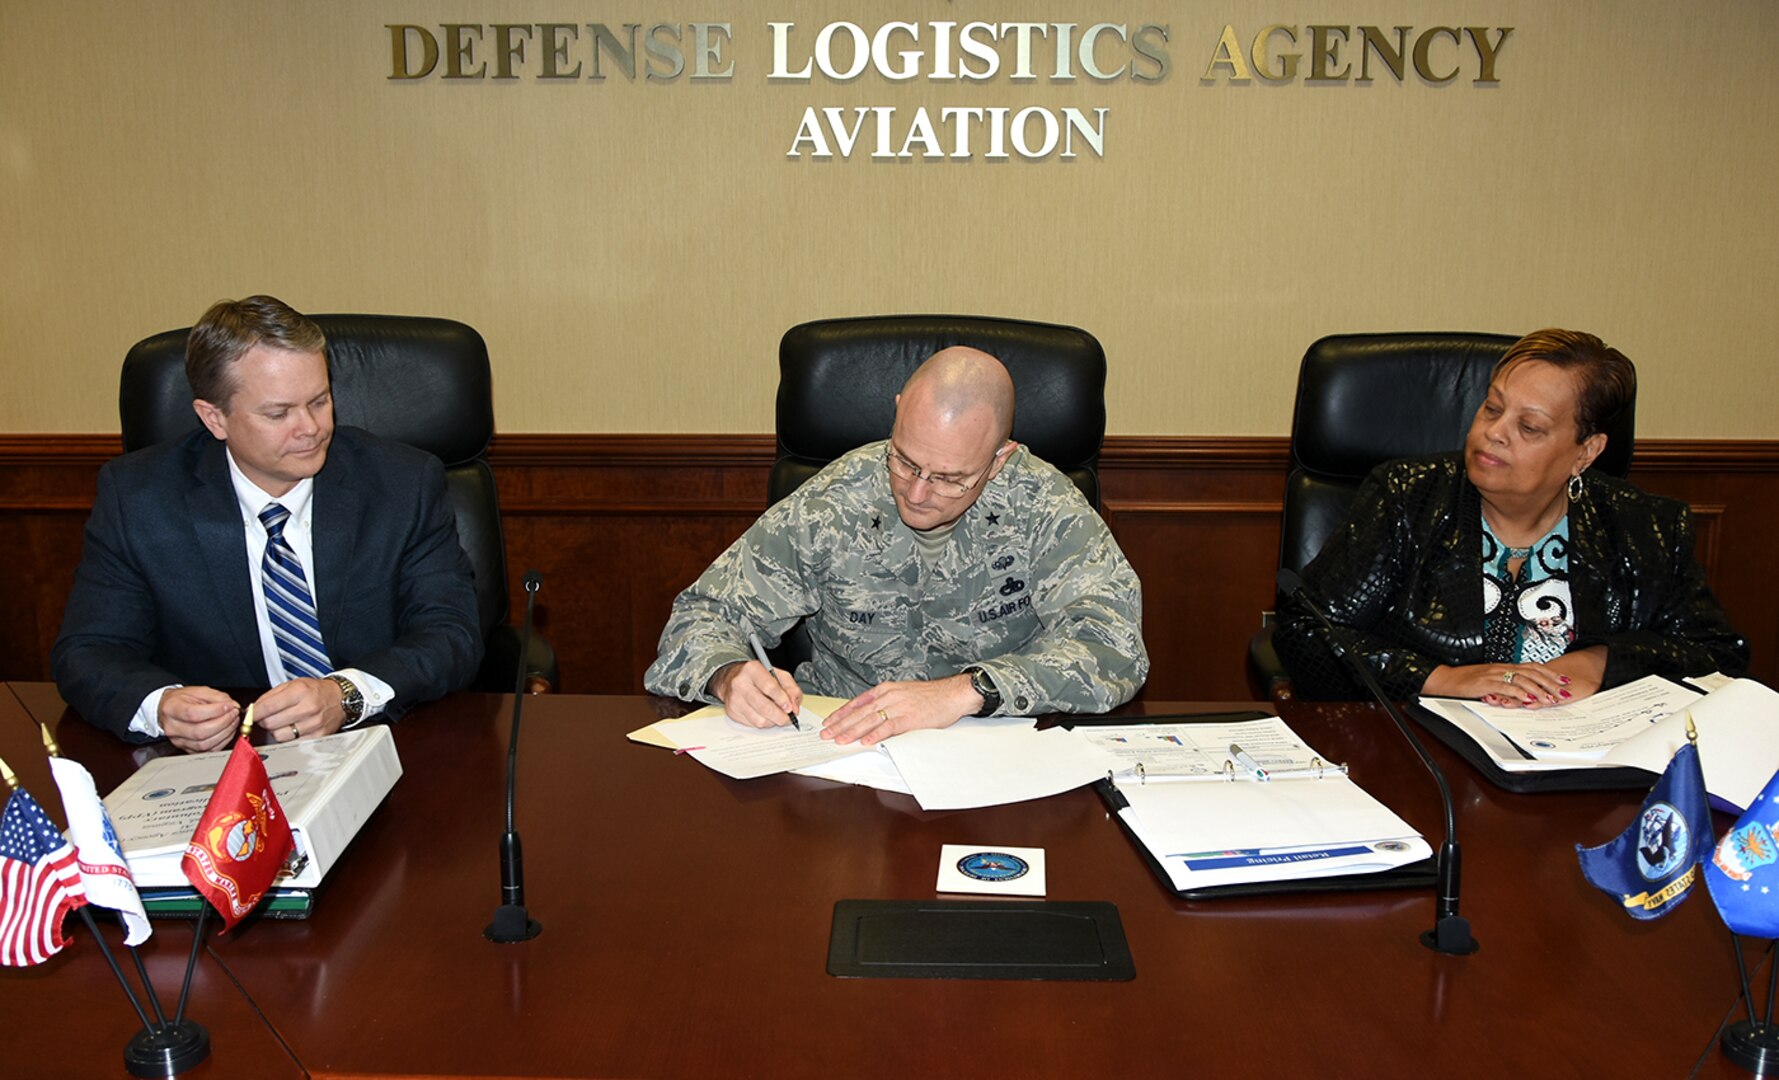 David Gibson, site director, Defense Logistics Agency Installation Support at Richmond and Lucy Lewis, president, American Federation of Government Employees Local 1992, look on as DLA Aviation Commander Air Force Brig. Gen. Allan Day signs the application March 15, 2016, requesting an Occupational Safety and Health Administration inspection to determine Defense Supply Center Richmond’s qualification for earning a star under OSHA’s Voluntary Protection Program. 